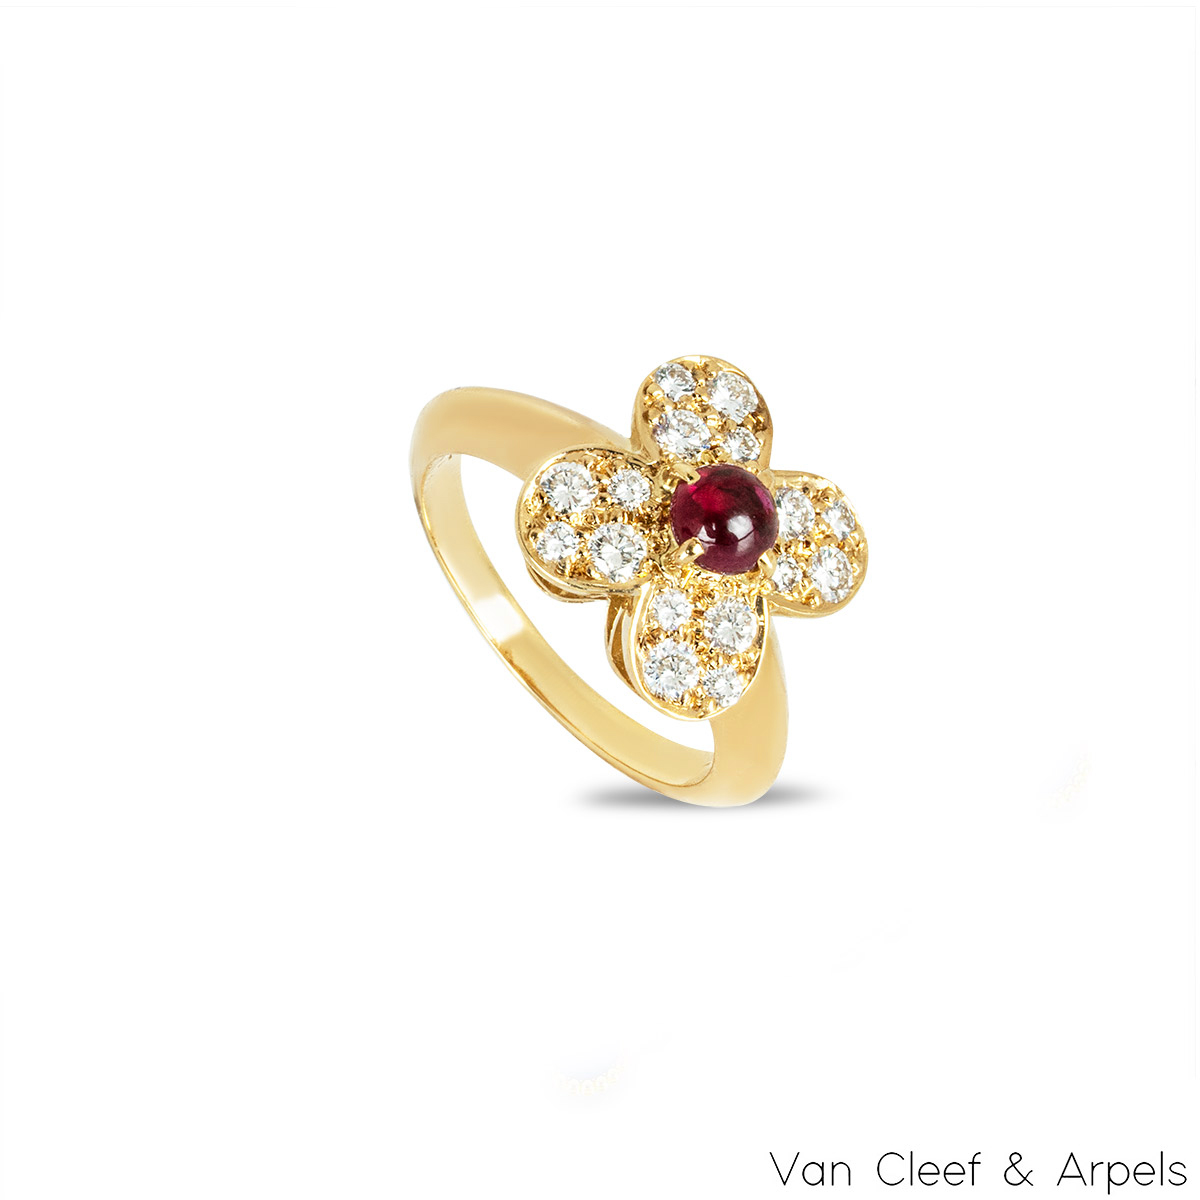 AN ICONIC RETRO GOLD, RUBY AND DIAMOND 'ZIP' NECKLACE, VAN CLEEF